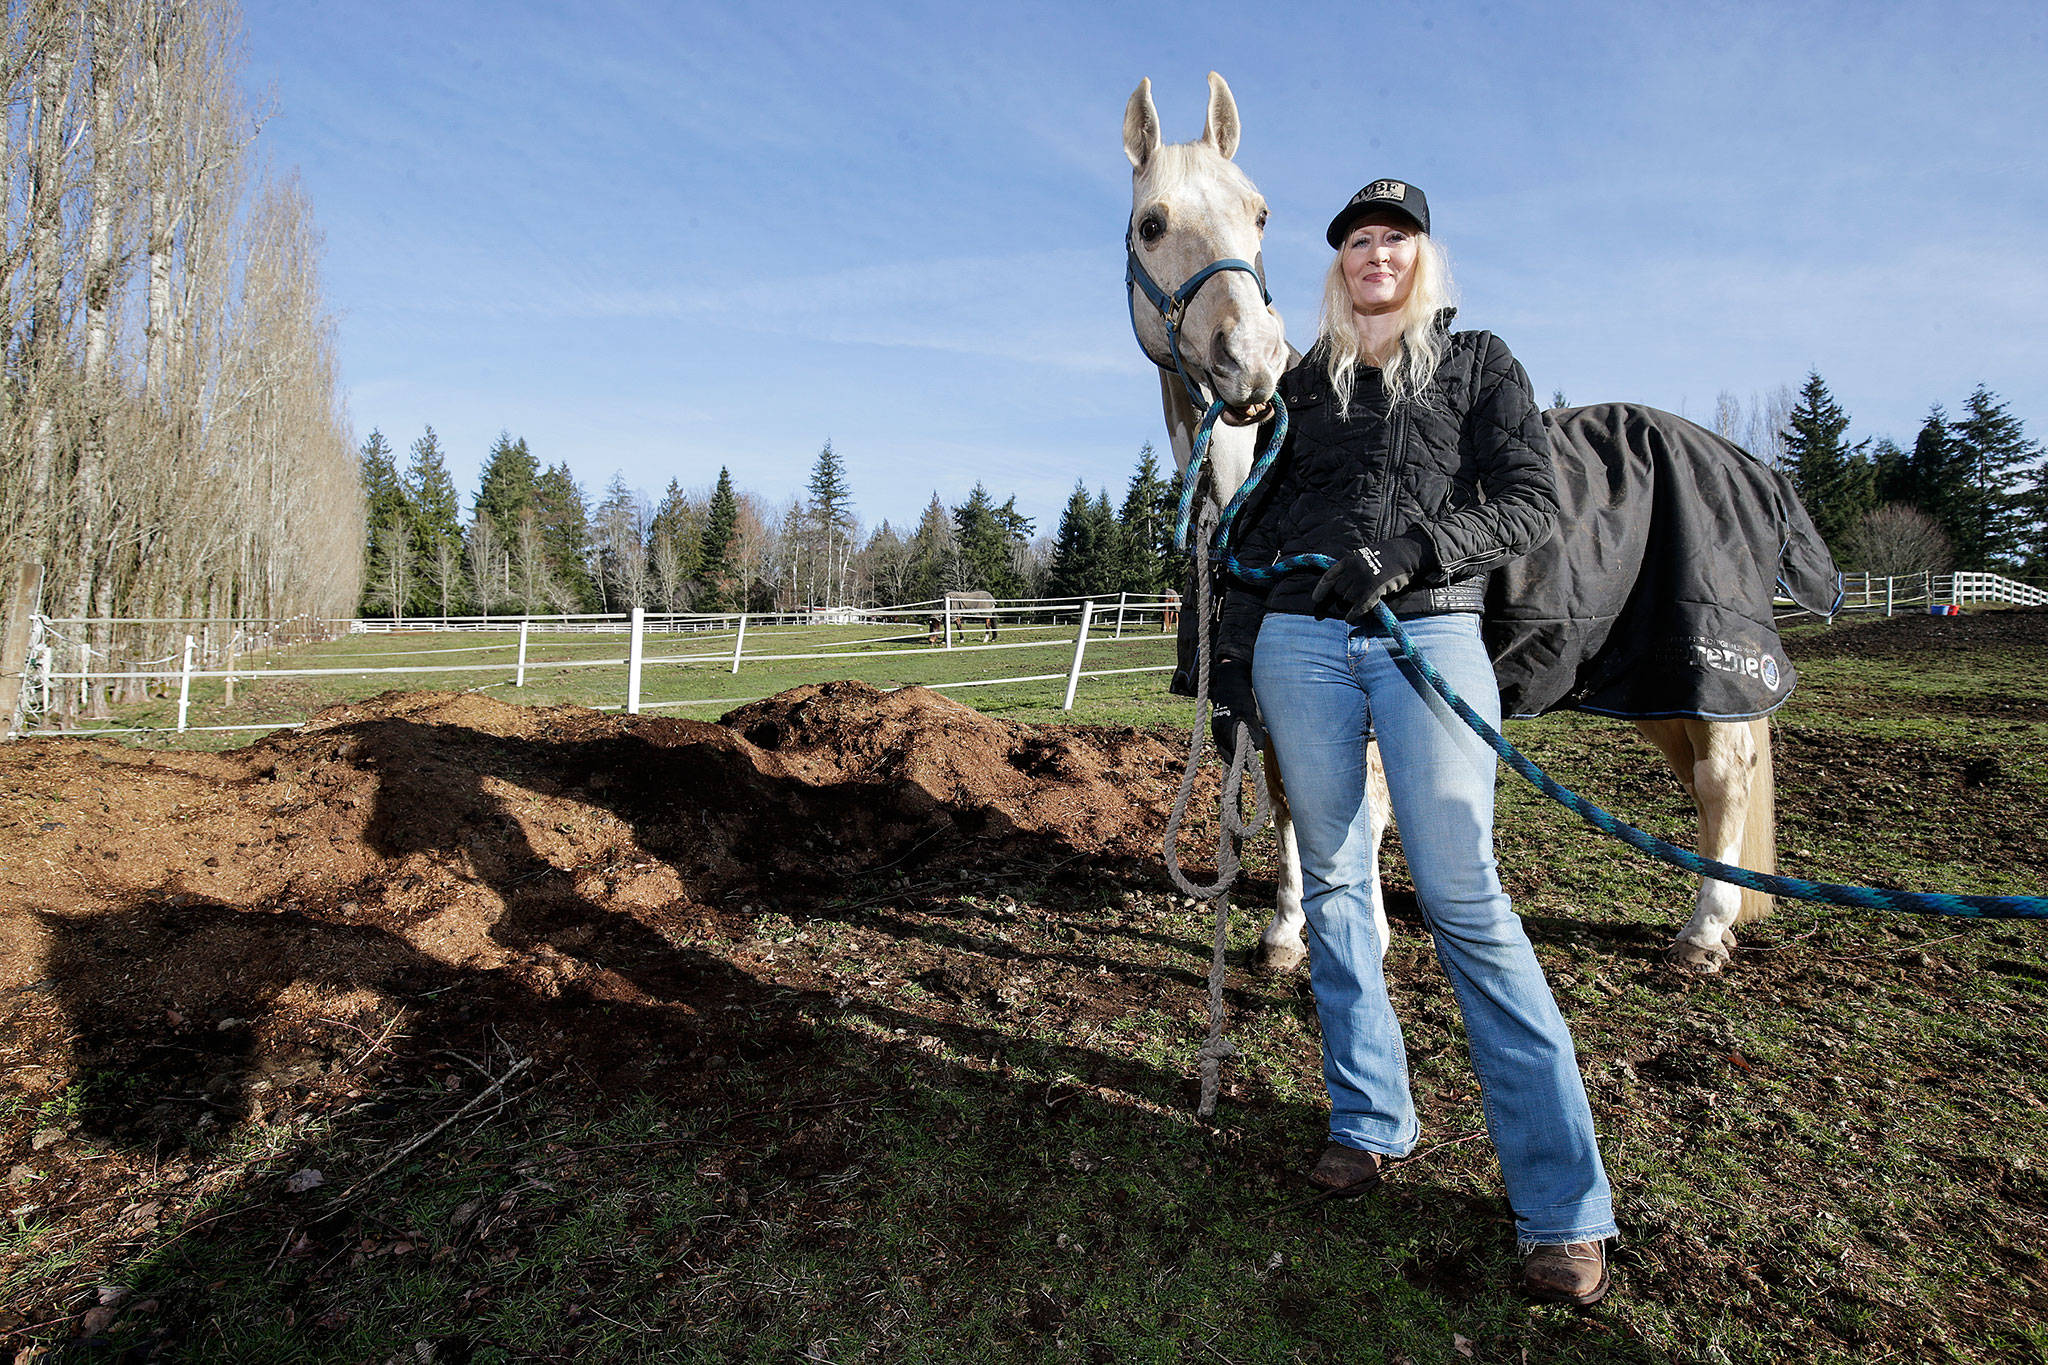 With her horse, Joe, next to her, Melonie Rainey, of White Birch Farm on the Tulalip Indian Reservation, talks Monday about her participation in the Conservation District’s horse manure spreading program. The program helps horse owners keep manure under control, turn it into fertilizer and use it on their pastures. (Andy Bronson / The Herald)